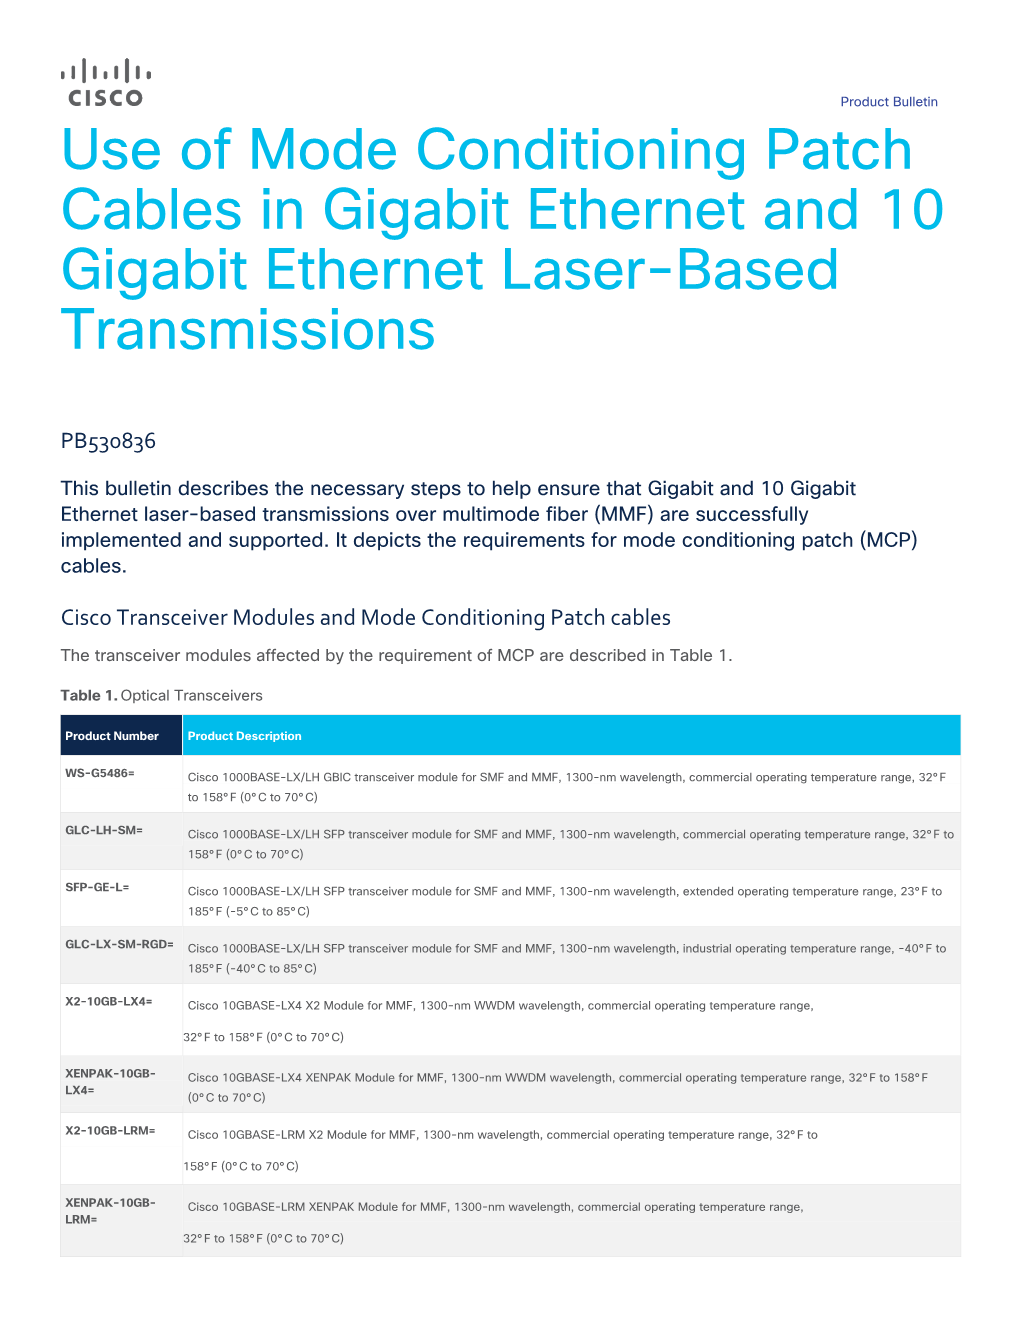 Use of Mode Conditioning Patch Cables in Gigabit Ethernet and 10 Gigabit Ethernet Laser-Based Transmissions